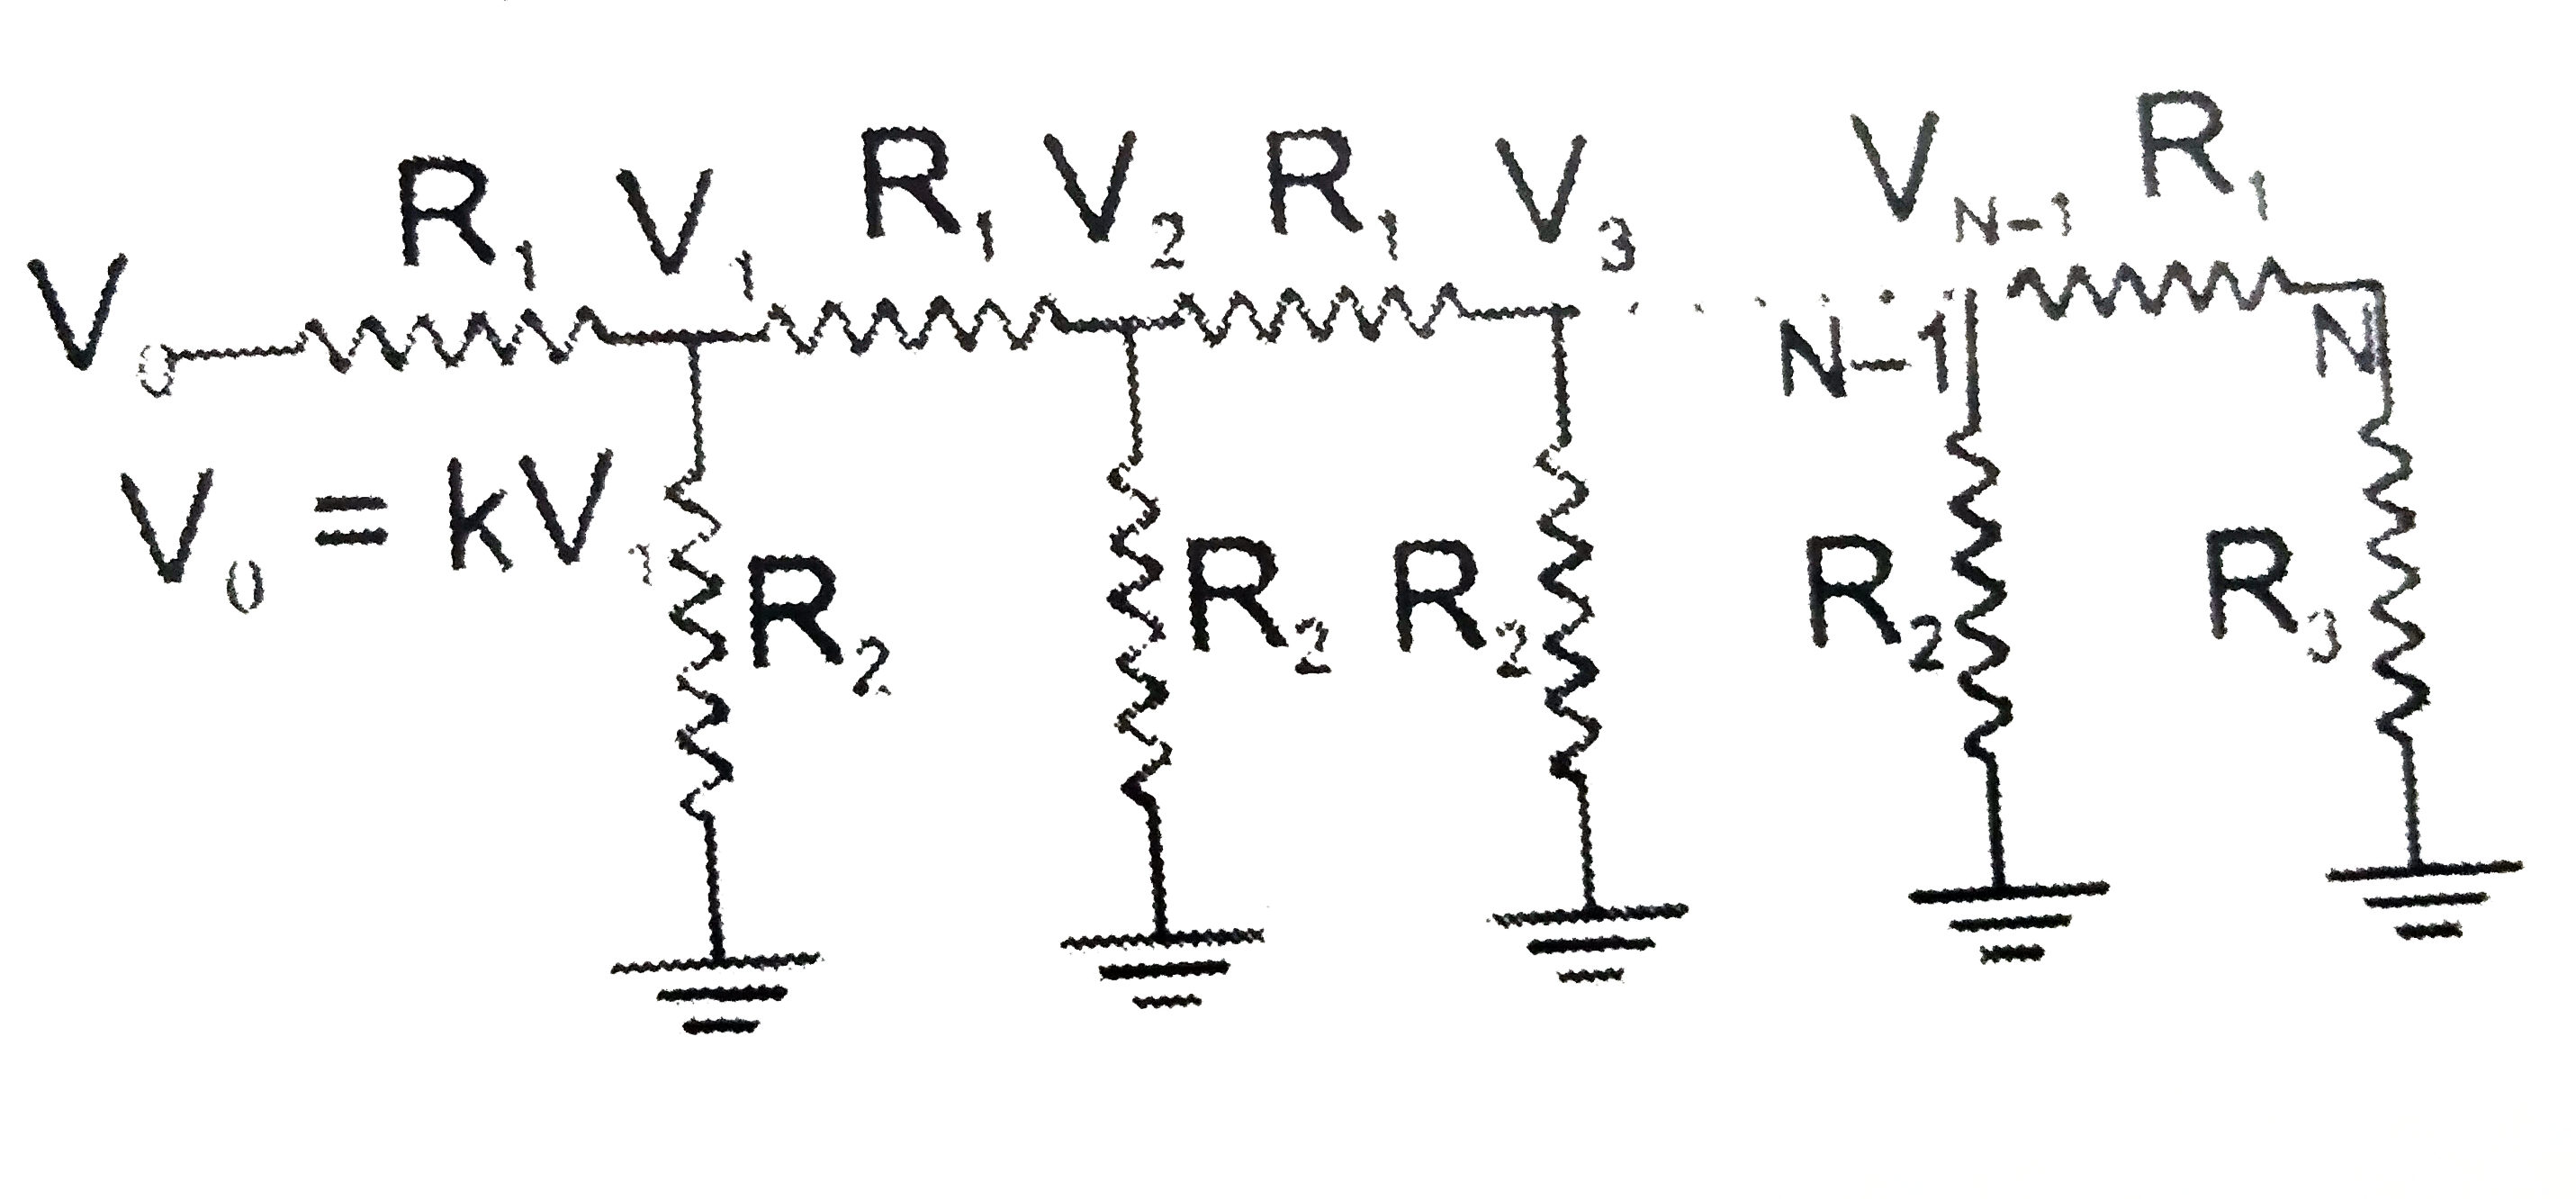 A network of resistance is constructed with R(1)